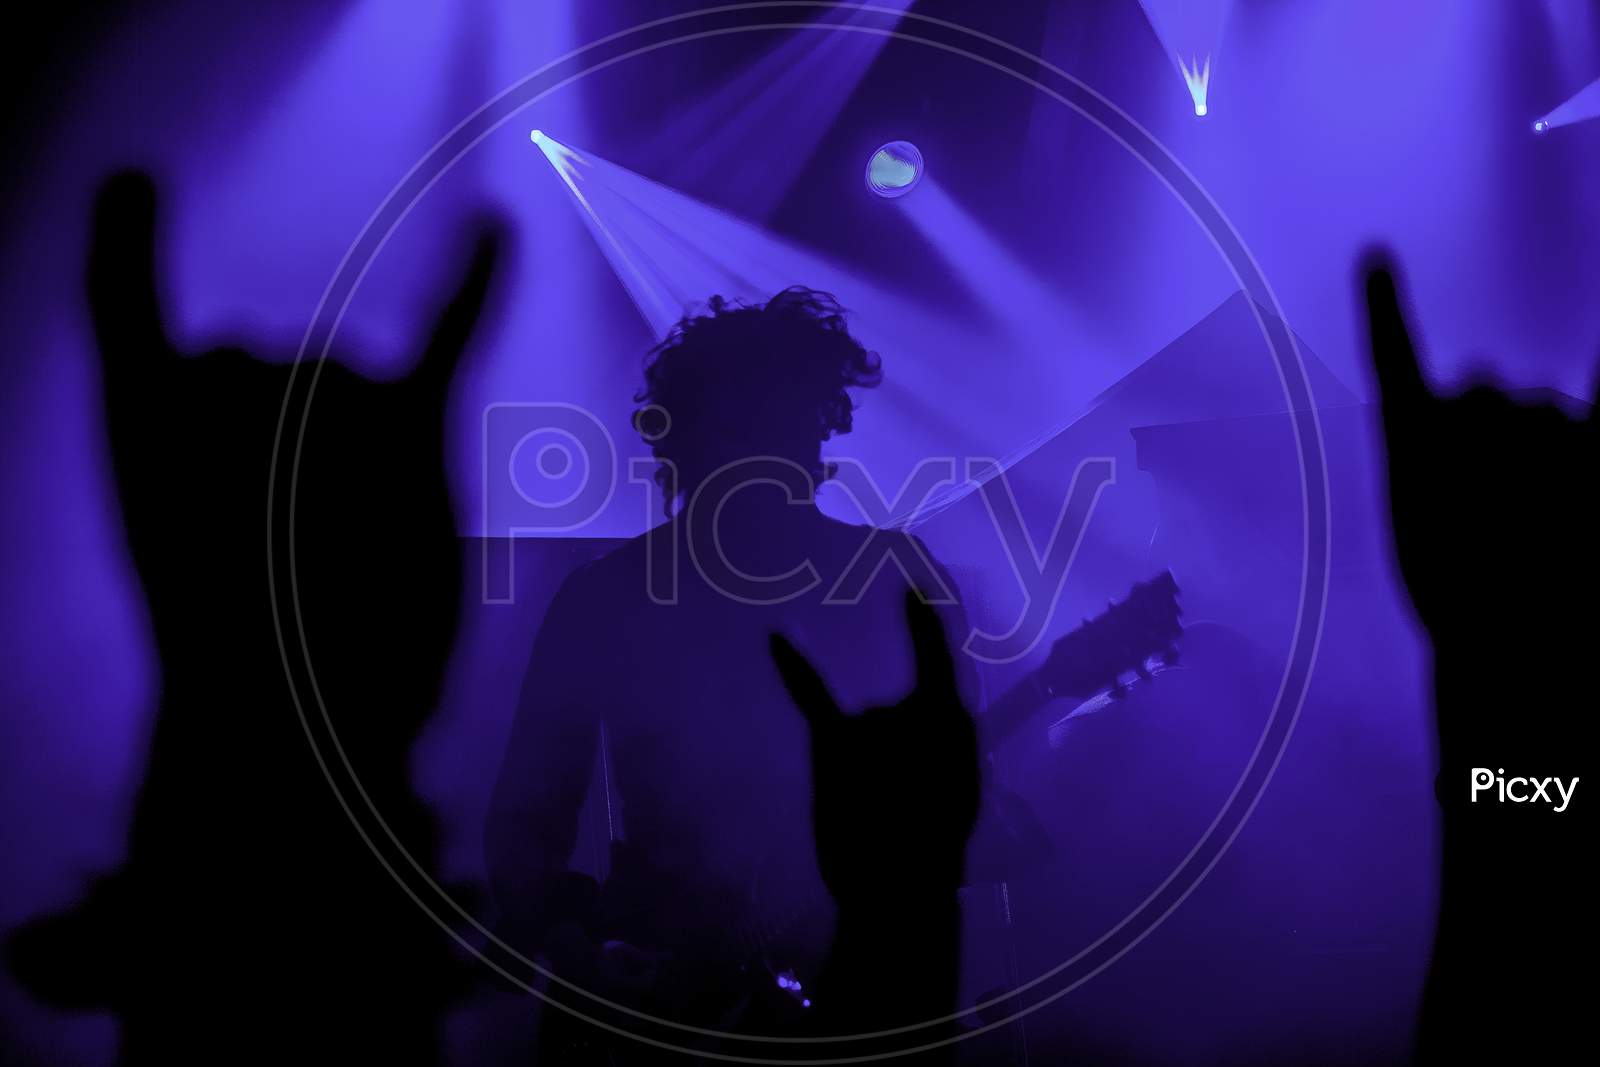 Krakow, Poland - September 20, 2014: Abstract Background Image Of An Artist From A Rock Band Music Concert In Front Of Crowd